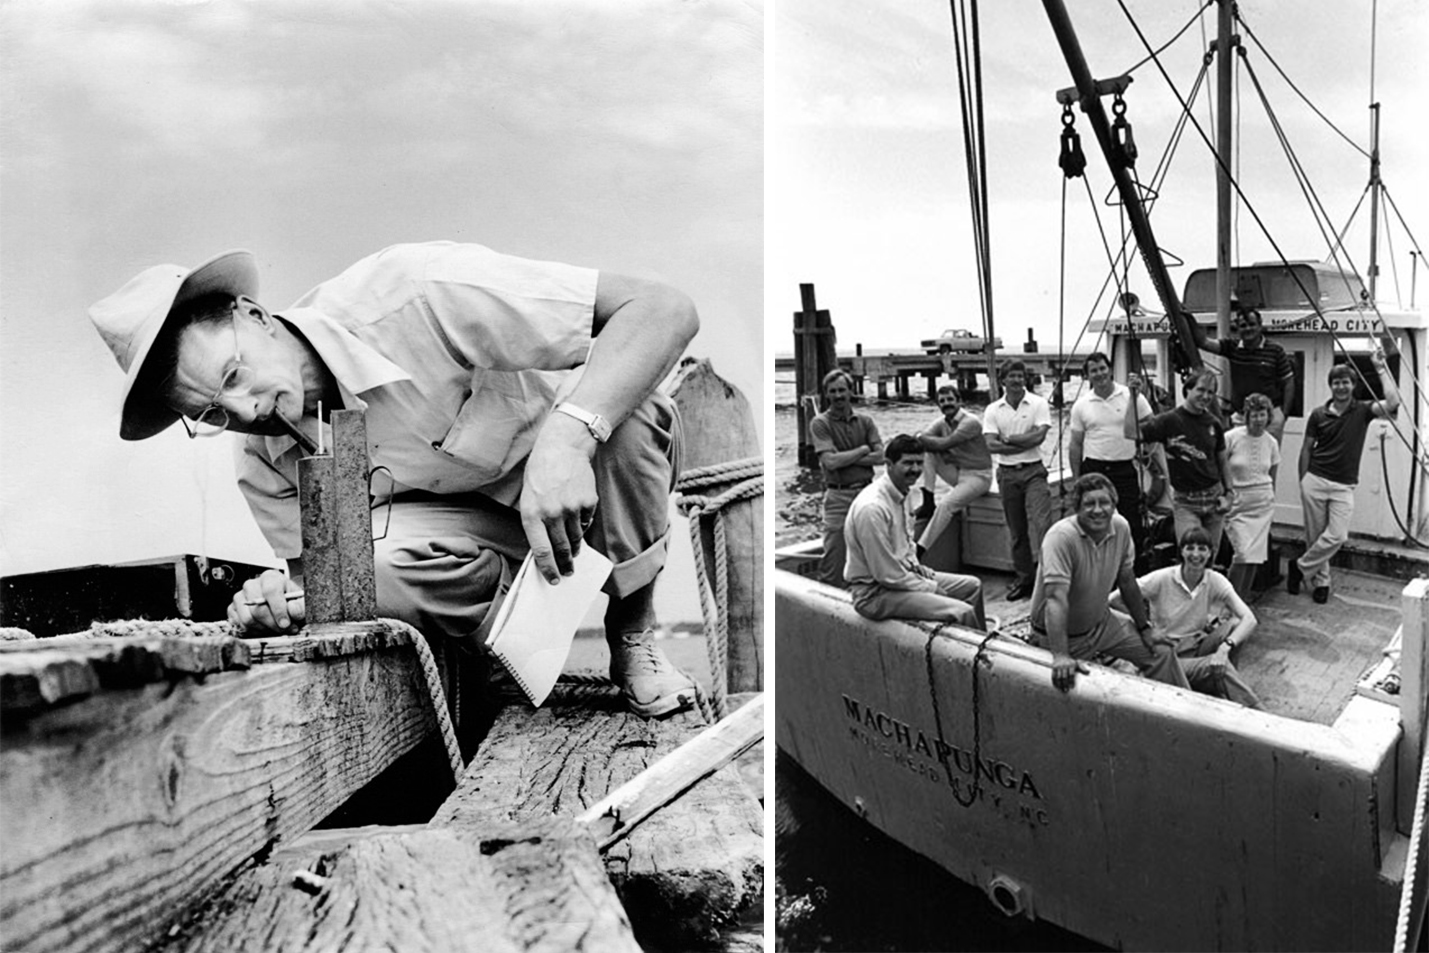 a black and white photo of a man leaning taking measurements from a dock and a black and white photo of a bunch of people on the back of a big fishing boat